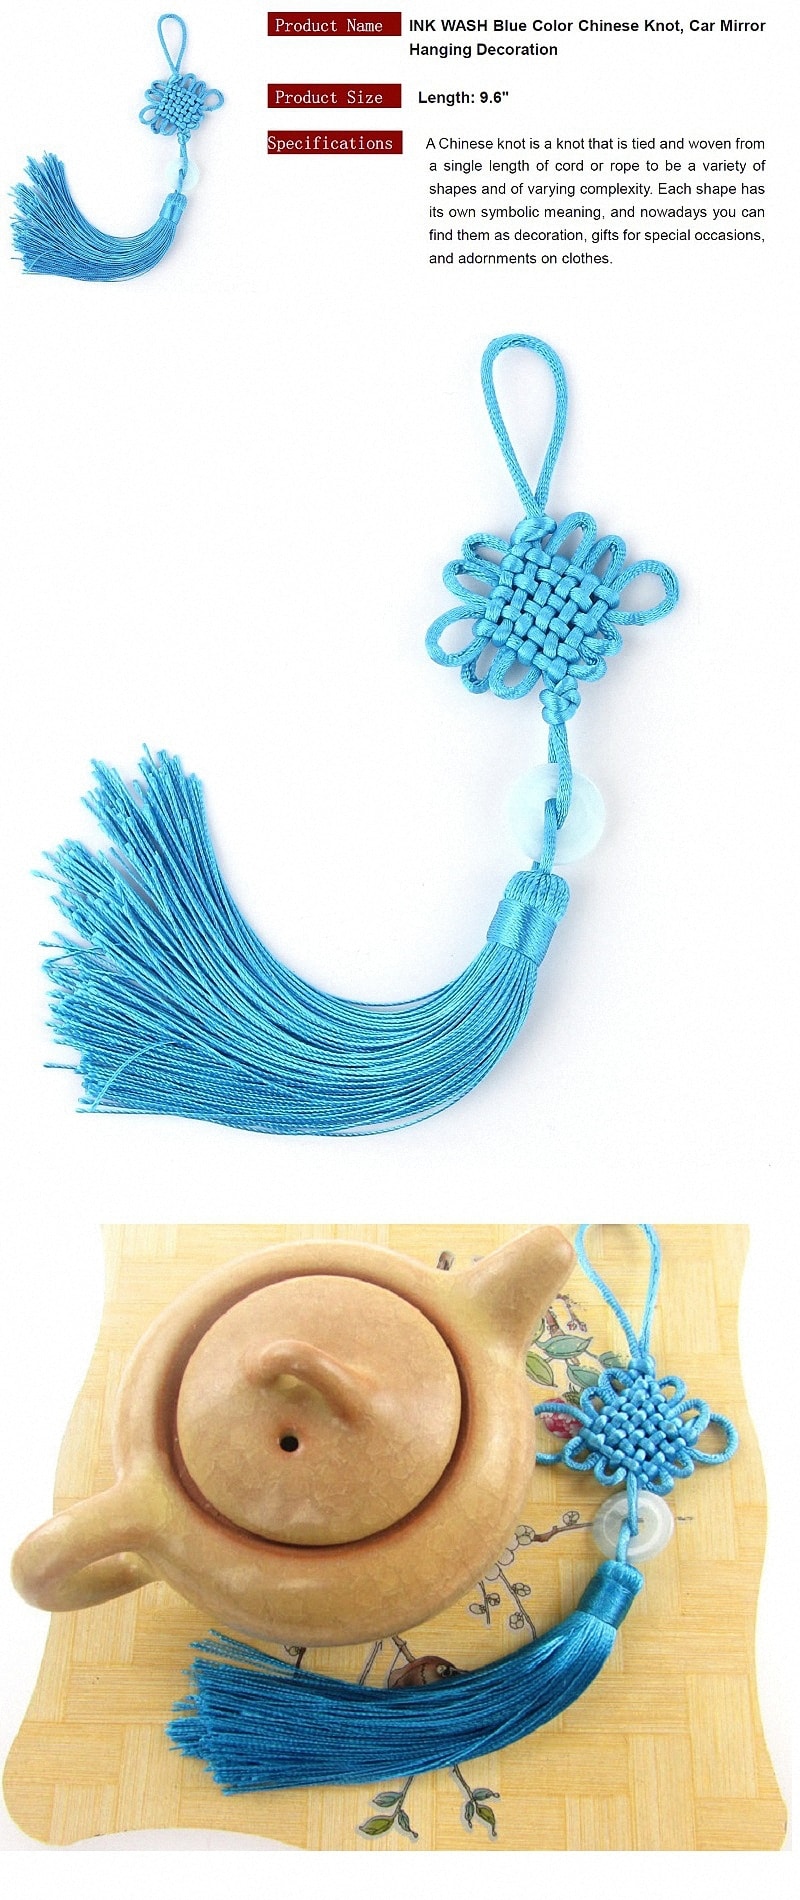 INK WASH Blue Color Chinese Knot Car Mirror Hanging Decoration